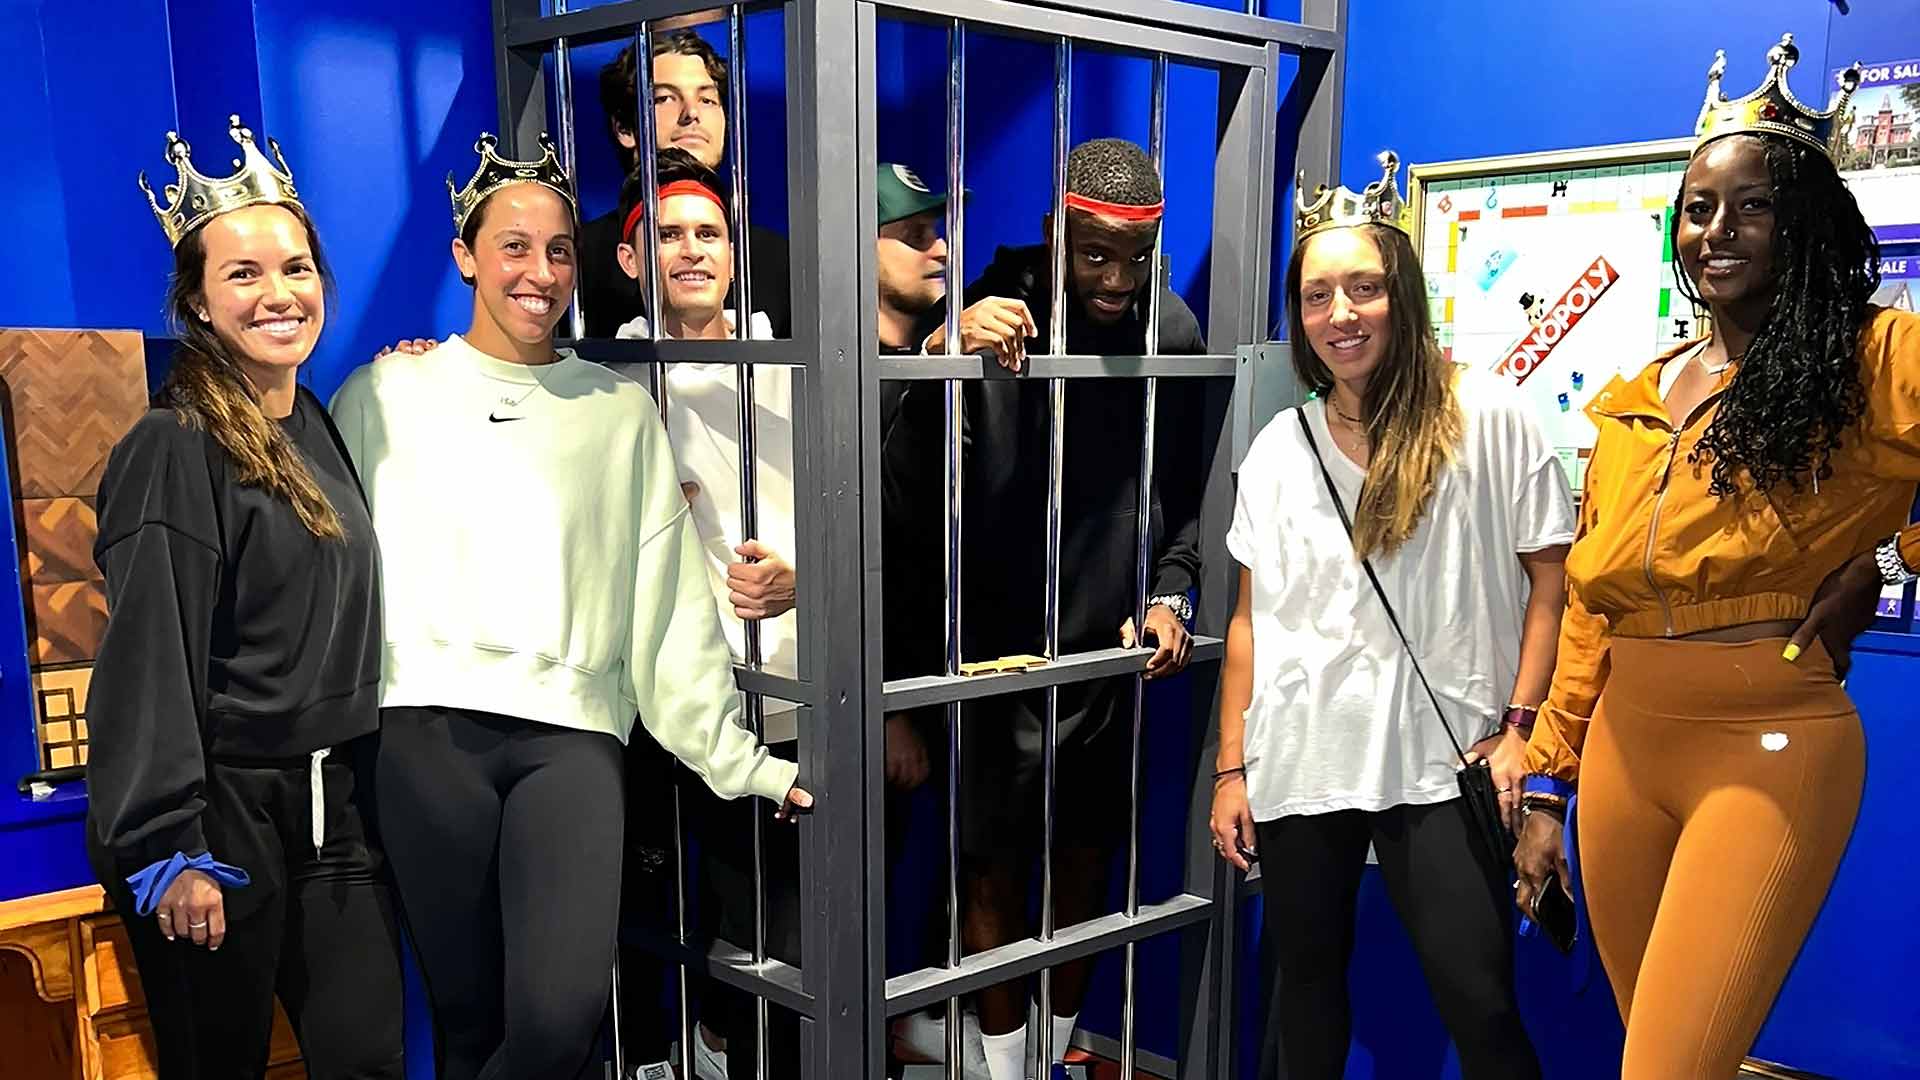 The women of Team United States celebrate their victory against their countrymen at an escape room in Sydney.